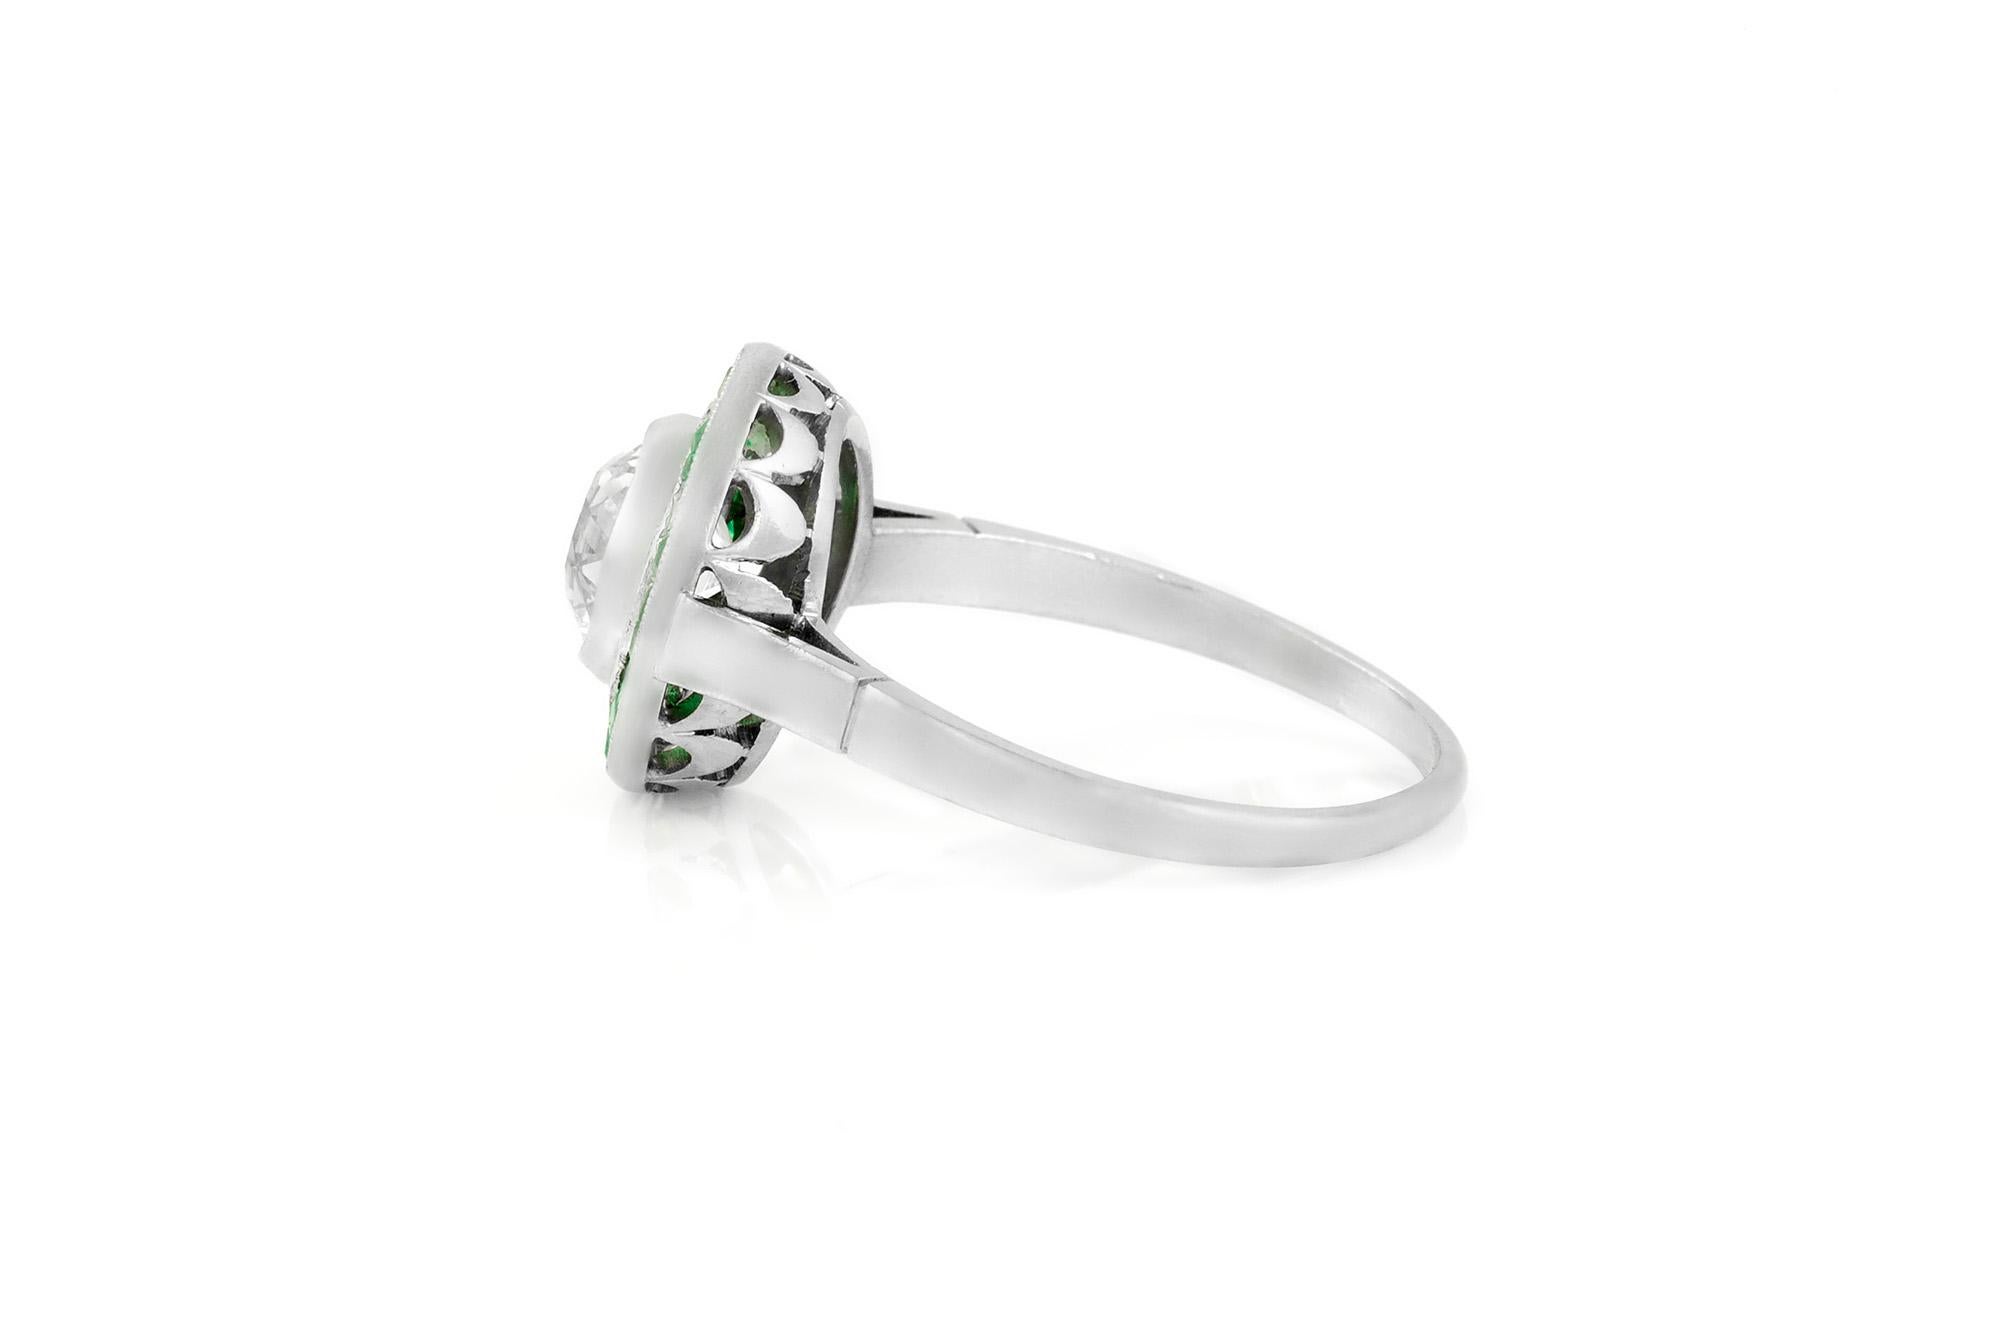 The ring is finely crafted in platinum with diamonds weighing approximately total of 1.50 carat and emerald.
